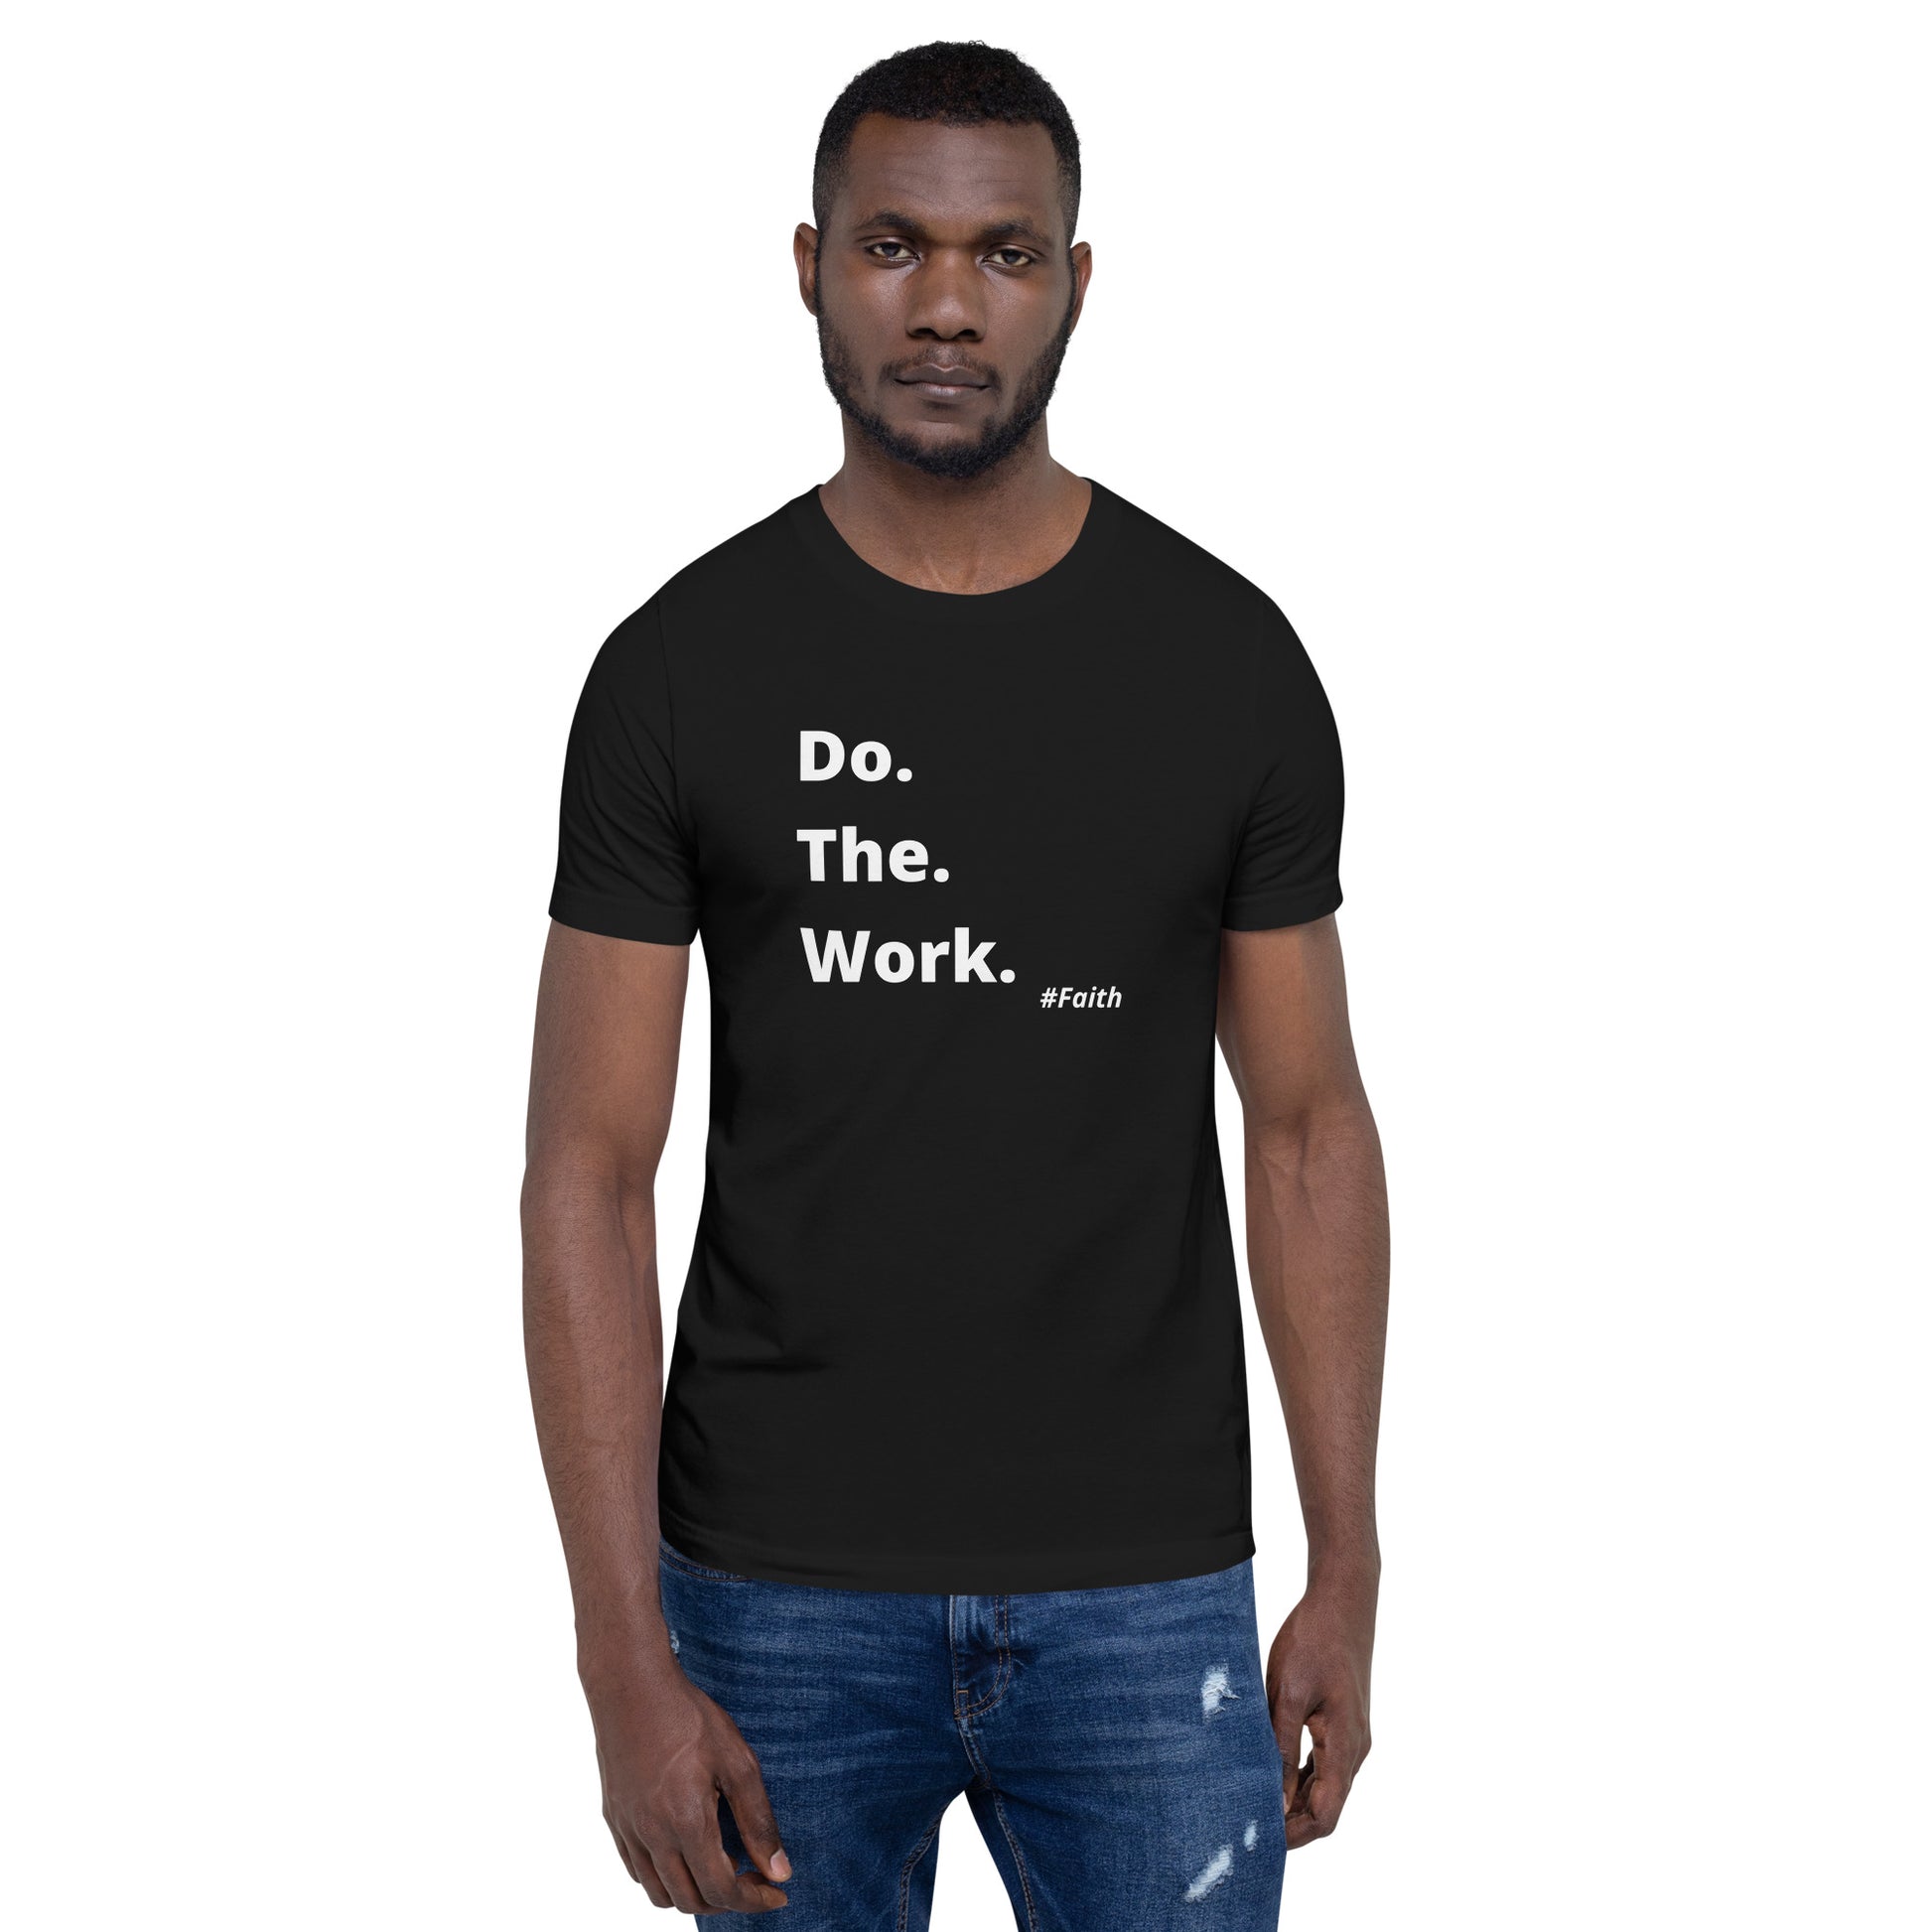 Do. T-Shirt – Short-Sleeve Work. Connection Black The. F.A.I.T.H. Unisex -